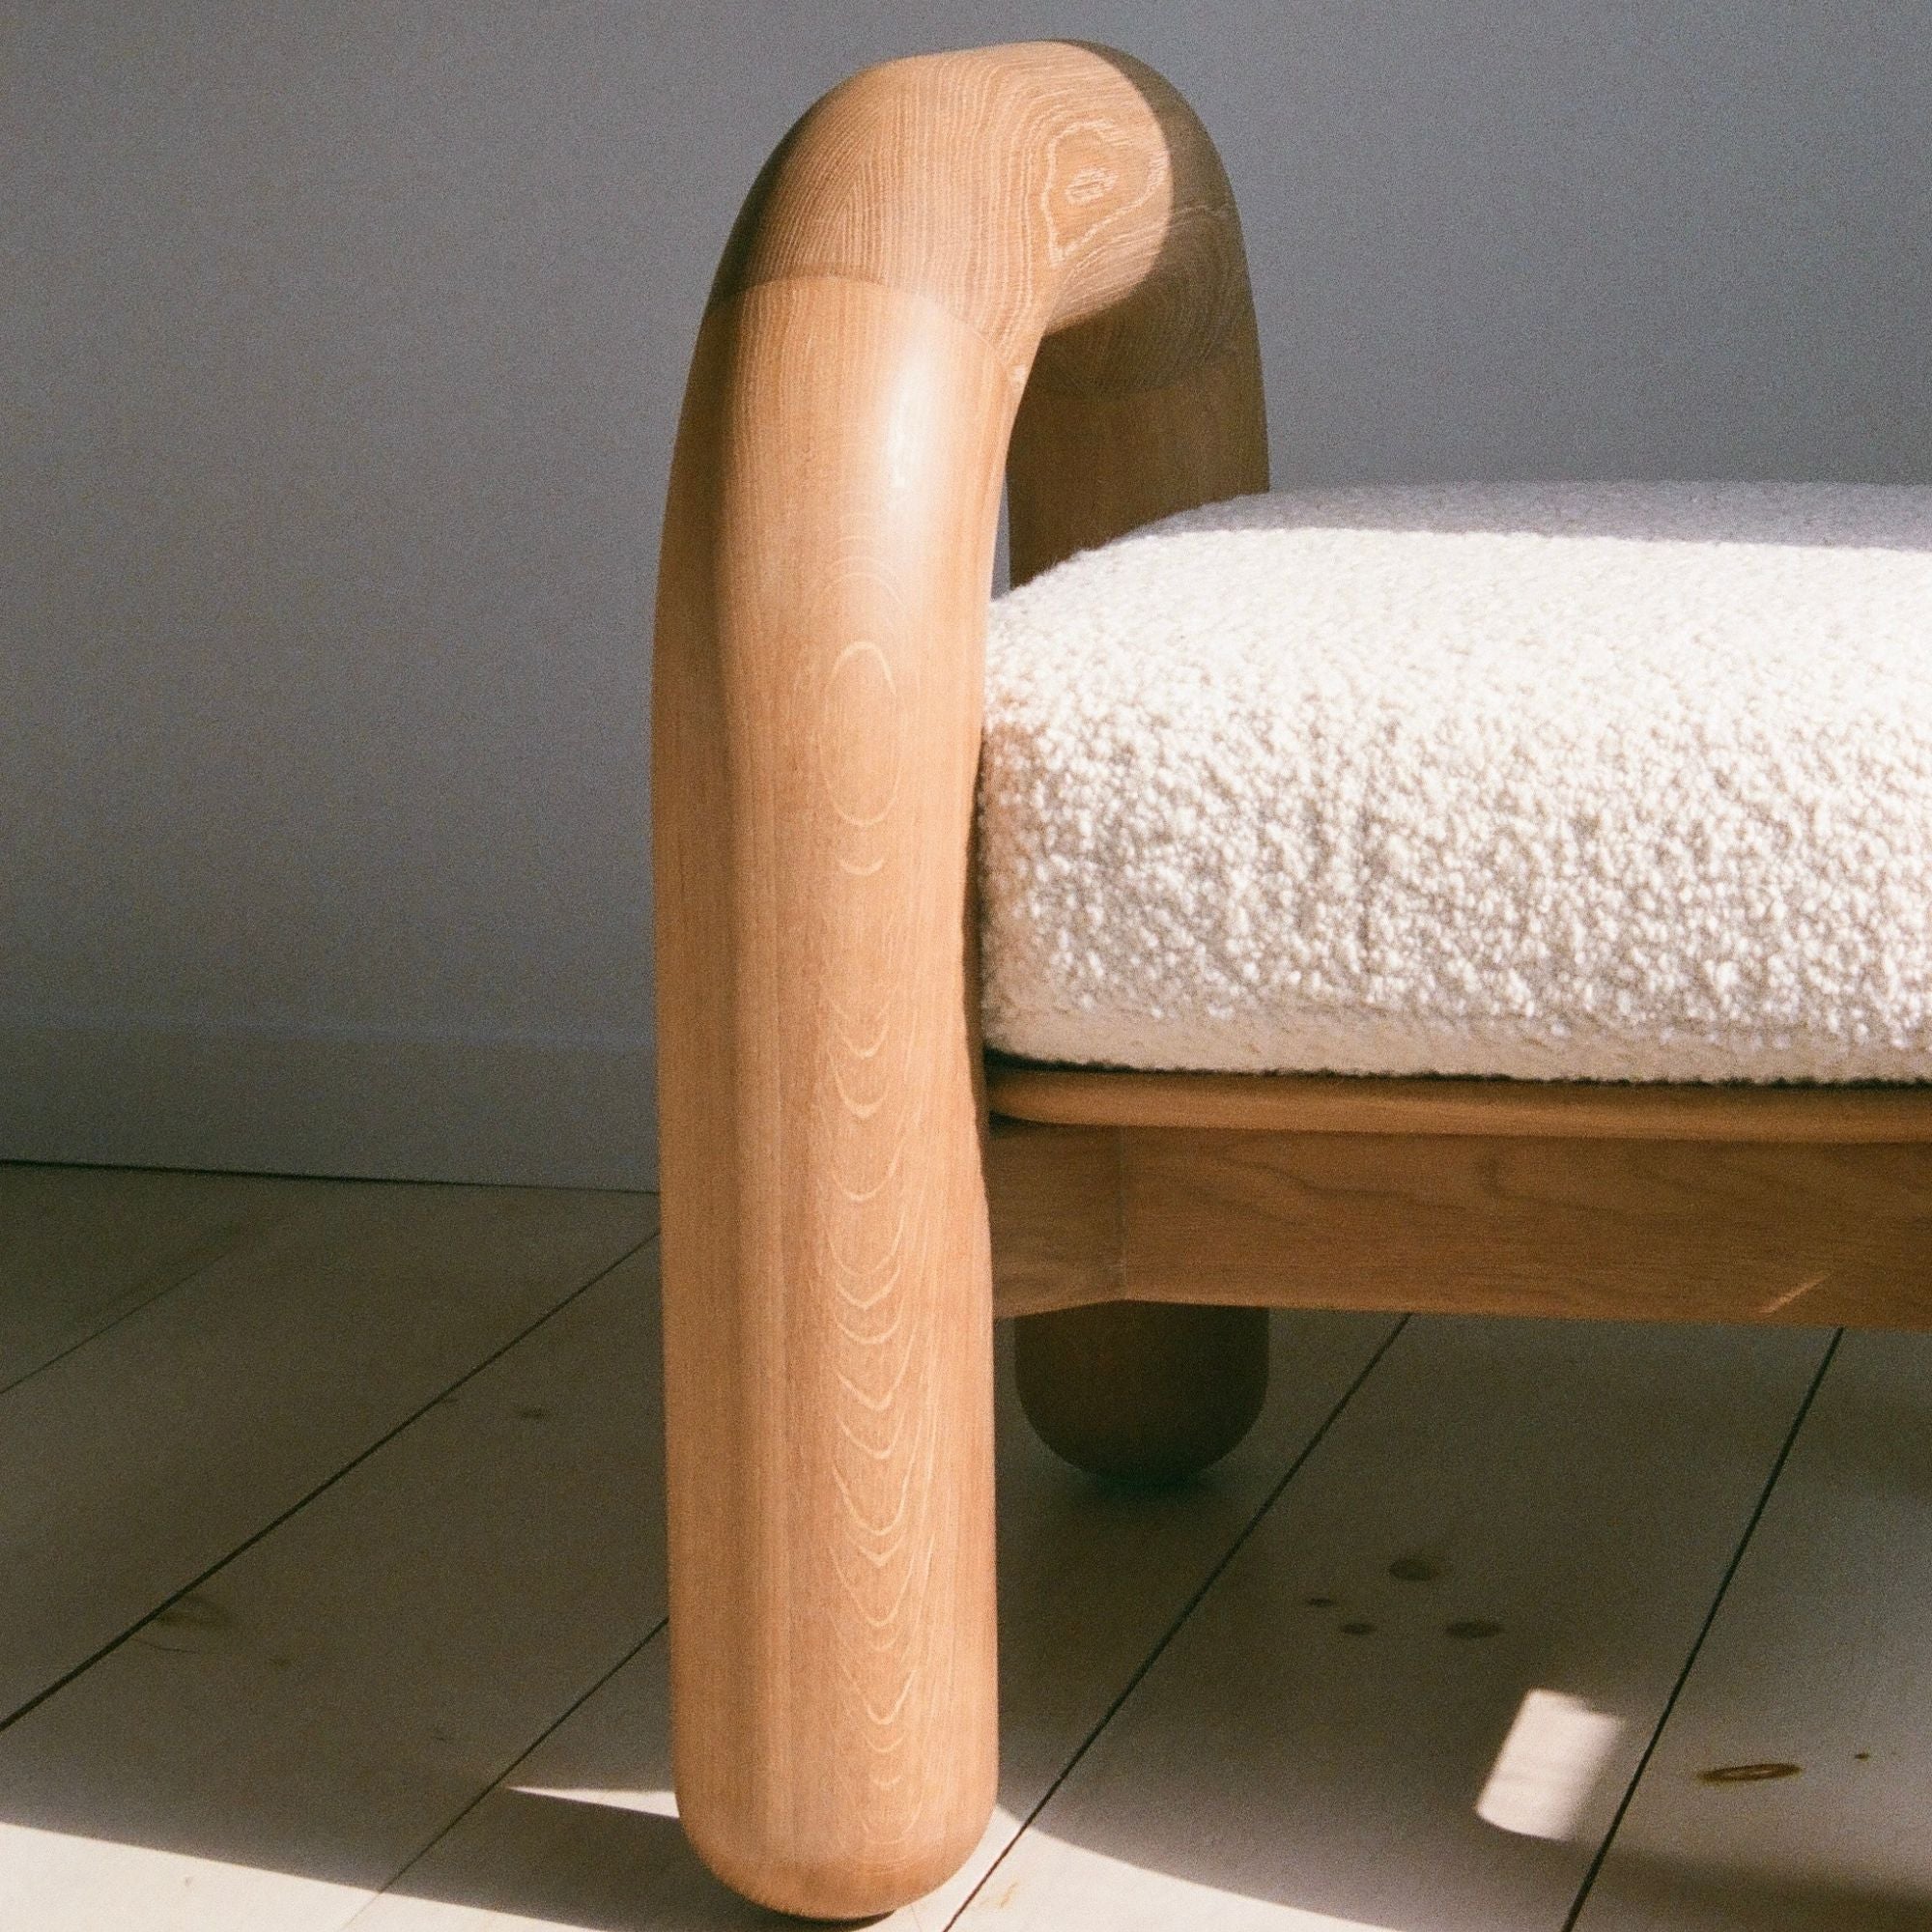 Lithic Lounge Chair